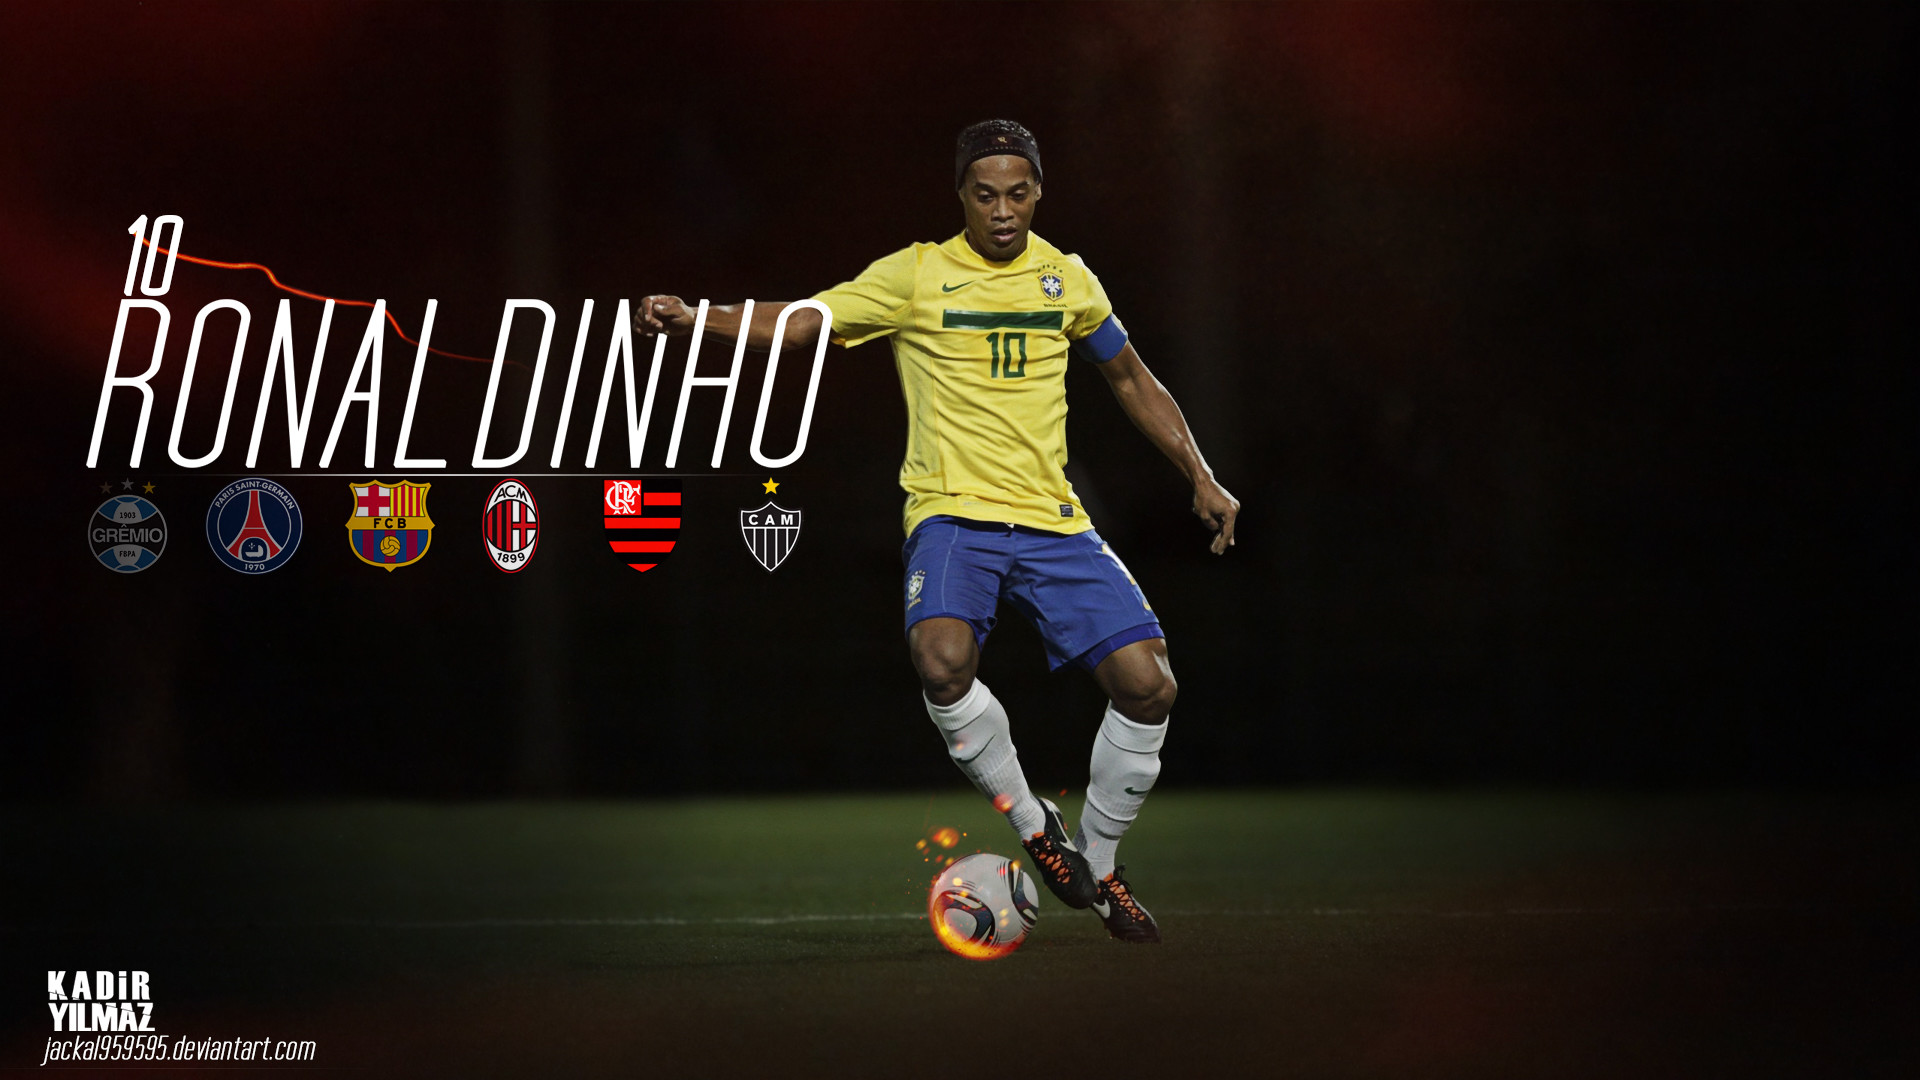 1920x1080 Wallpapers84 daily update fresh images and Ronaldinho Wallpapers HD for  your desktop and mobile in professional